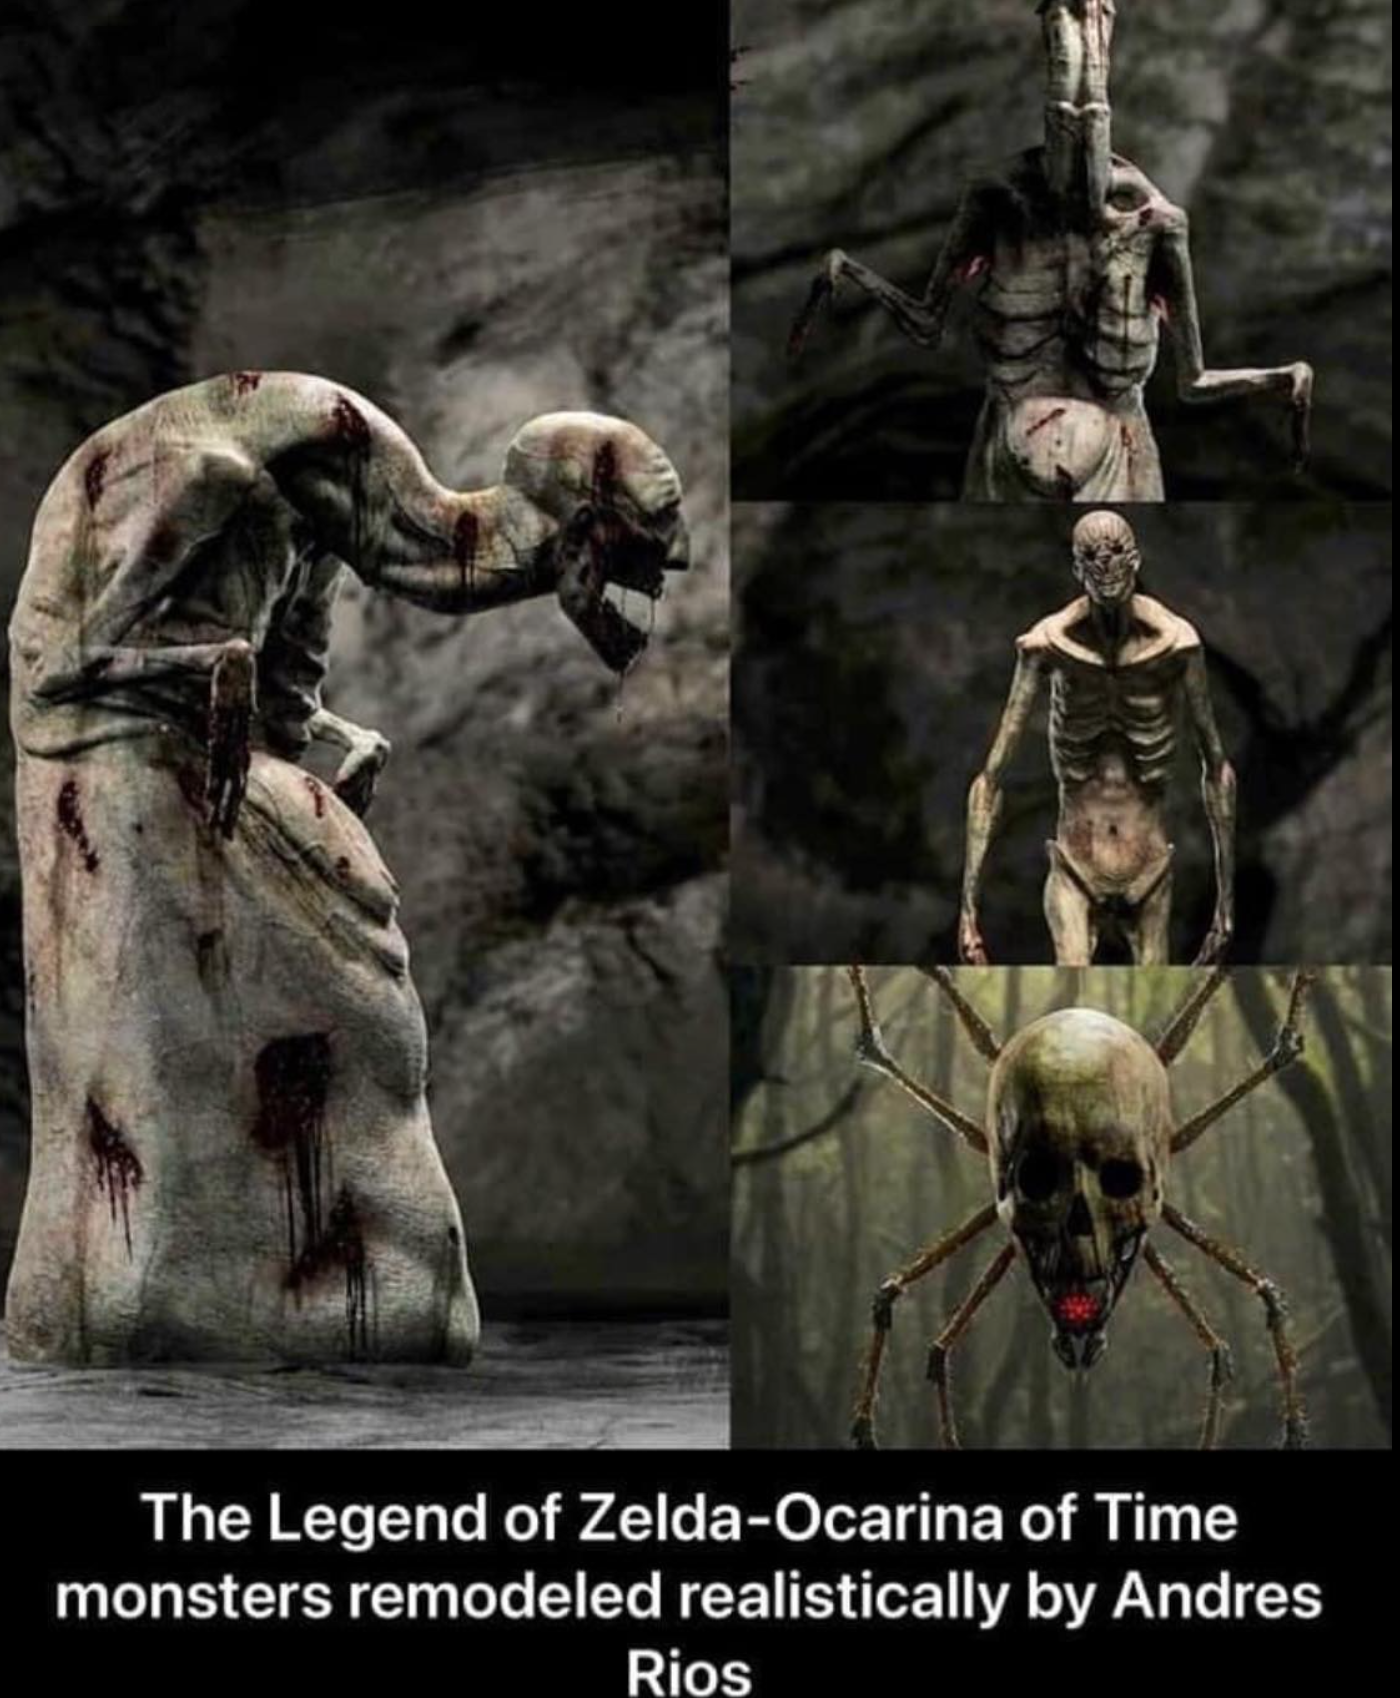 fictional character - The Legend of ZeldaOcarina of Time monsters remodeled realistically by Andres Rios